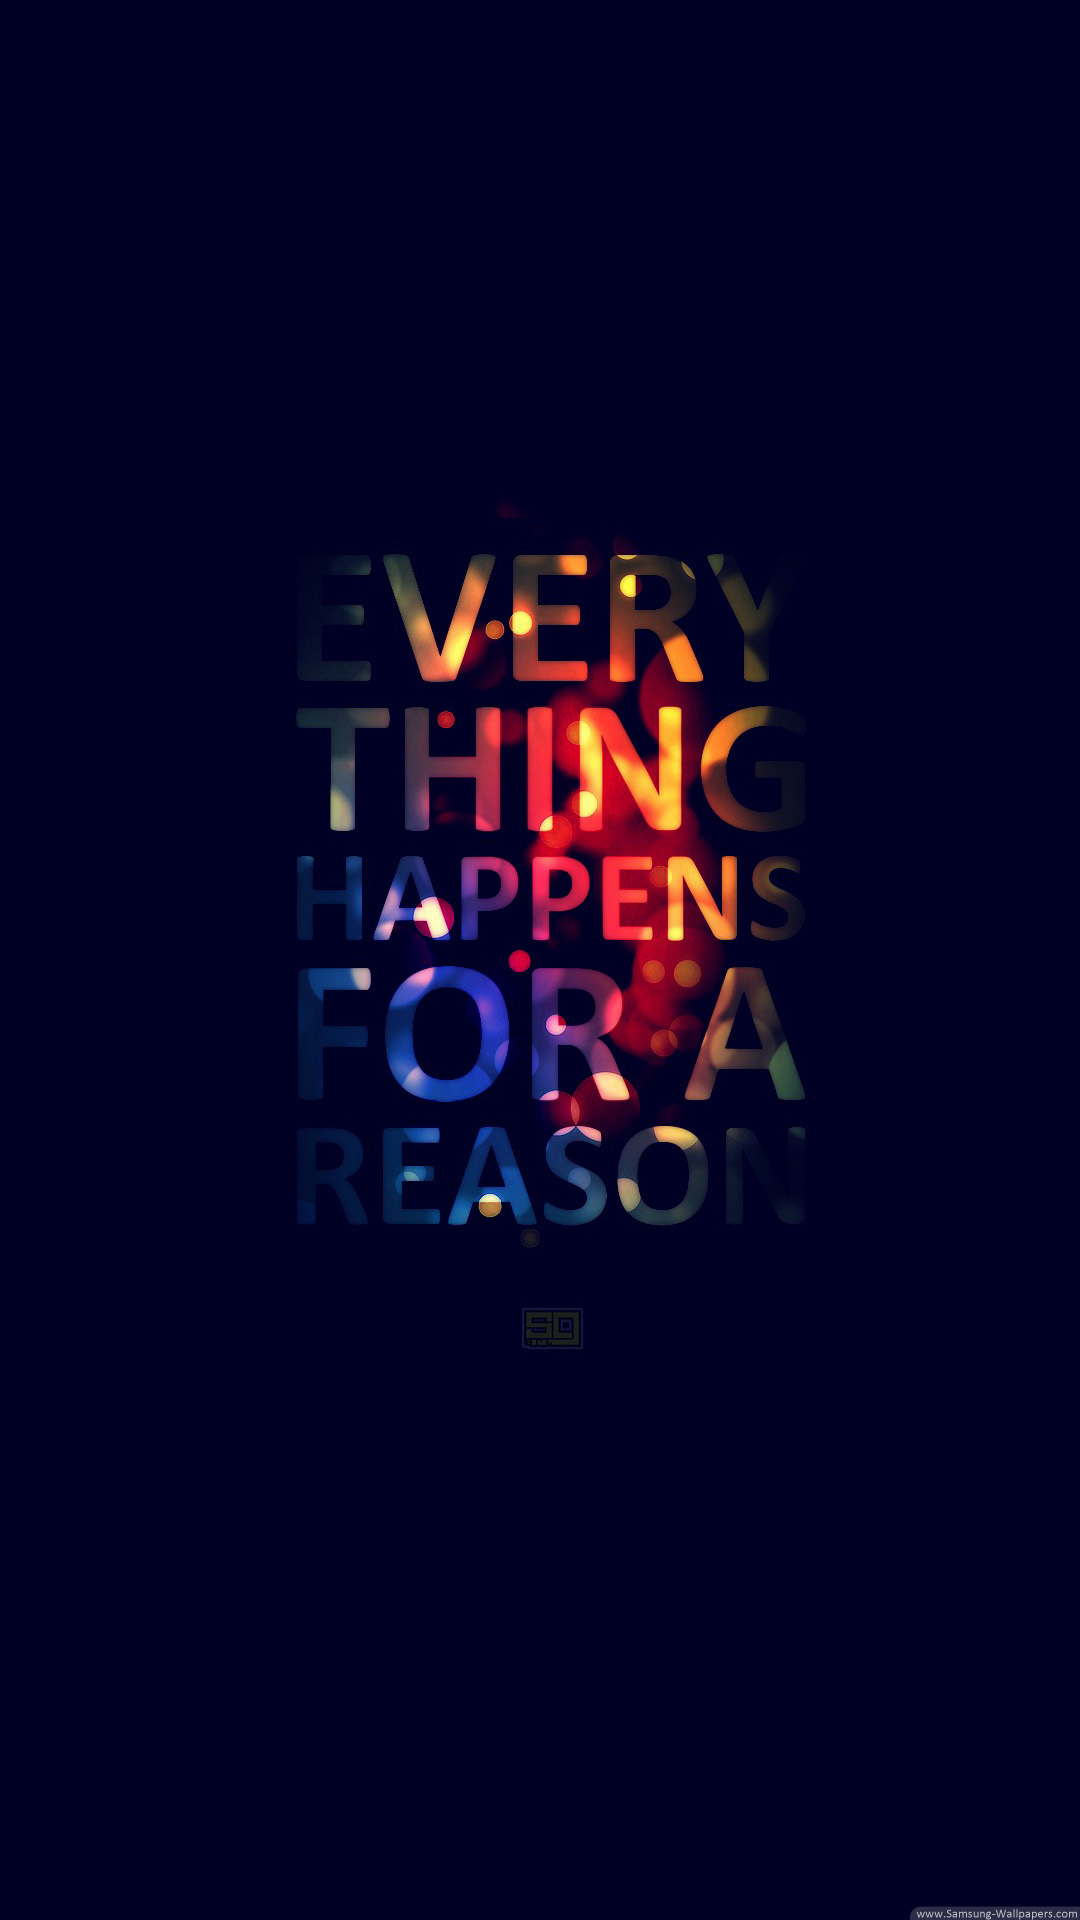 Everything Happens For A Reason 名言スマホ壁紙 Iphone Wallpapers